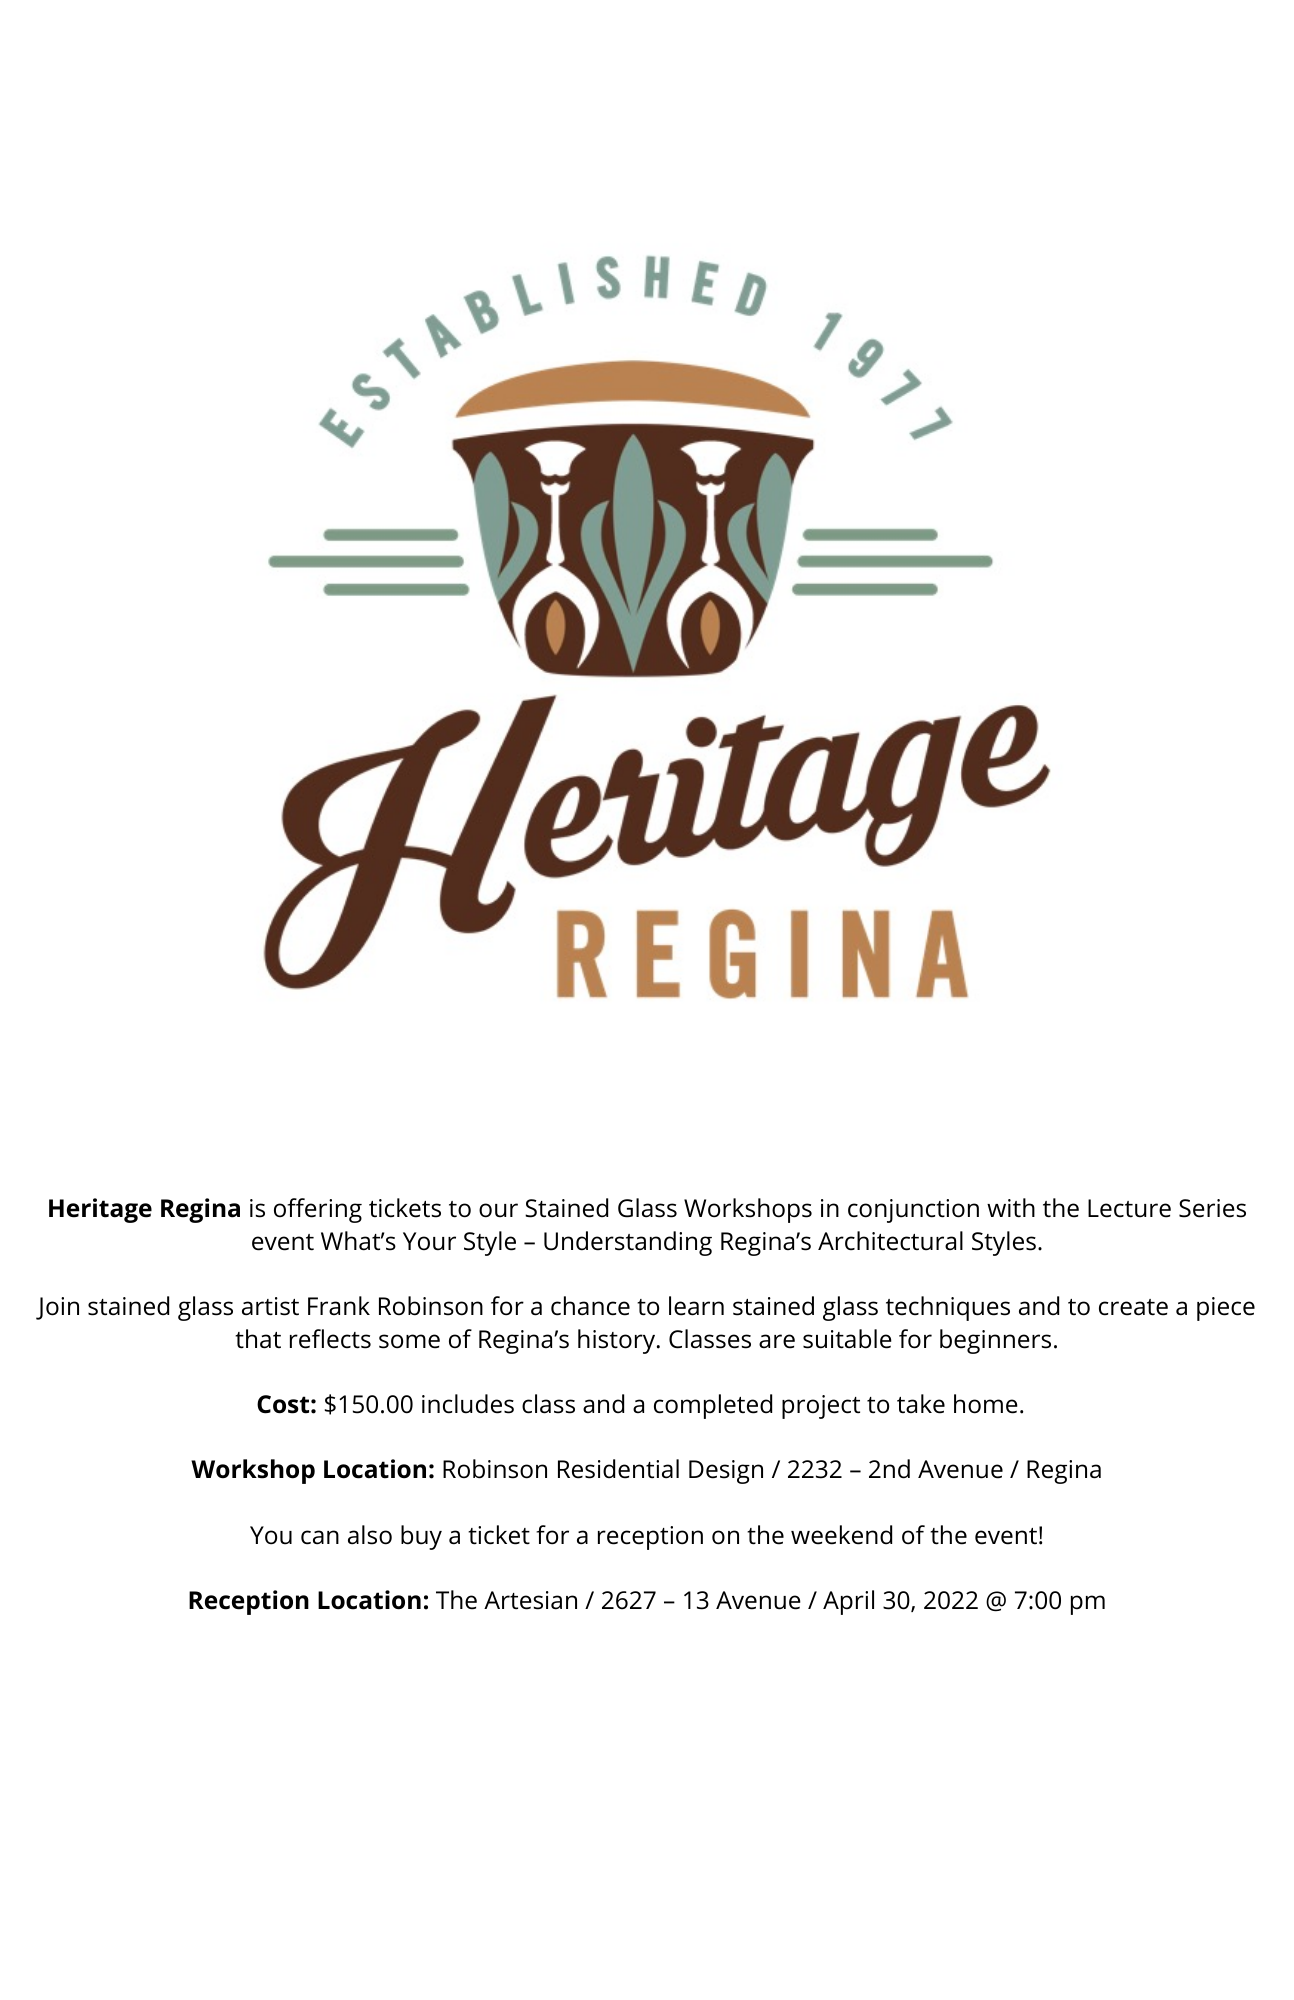 Heritage Regina Stained Glass Workshop and Reception